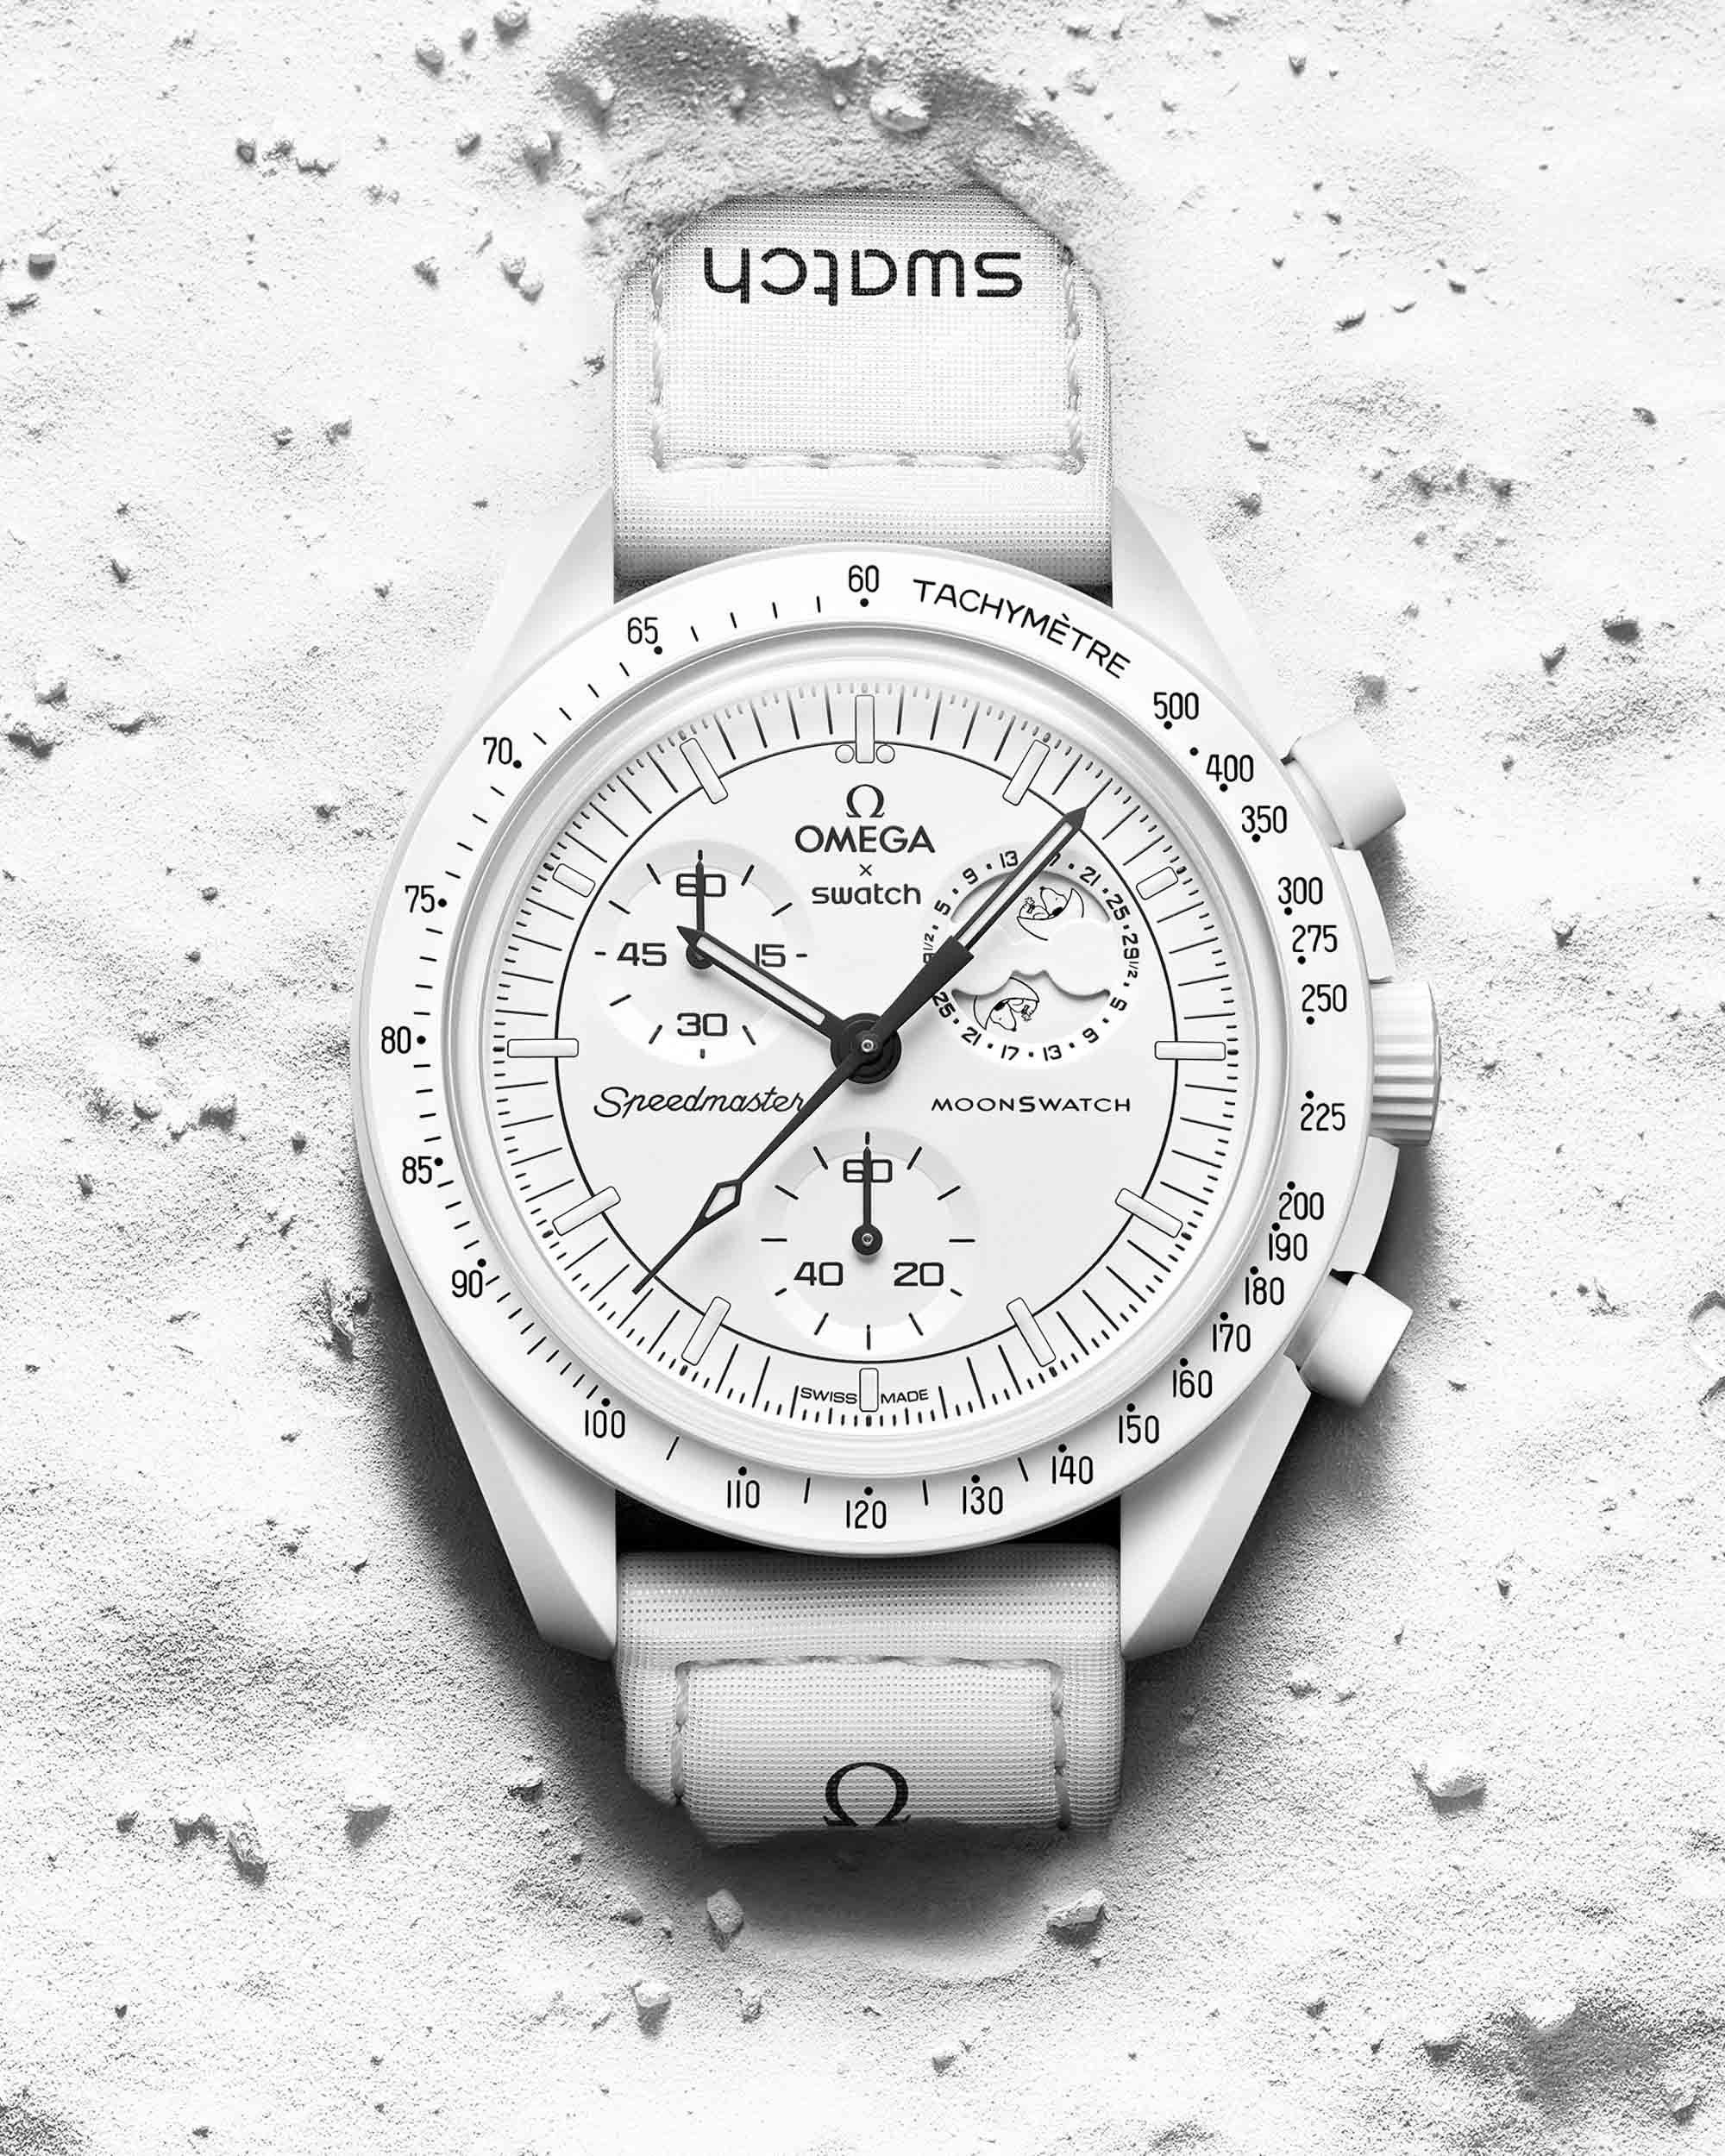 swatch mission to moonphase moonswatch speedmaster bioceramic omega swatch snoopy peanuts crop 1